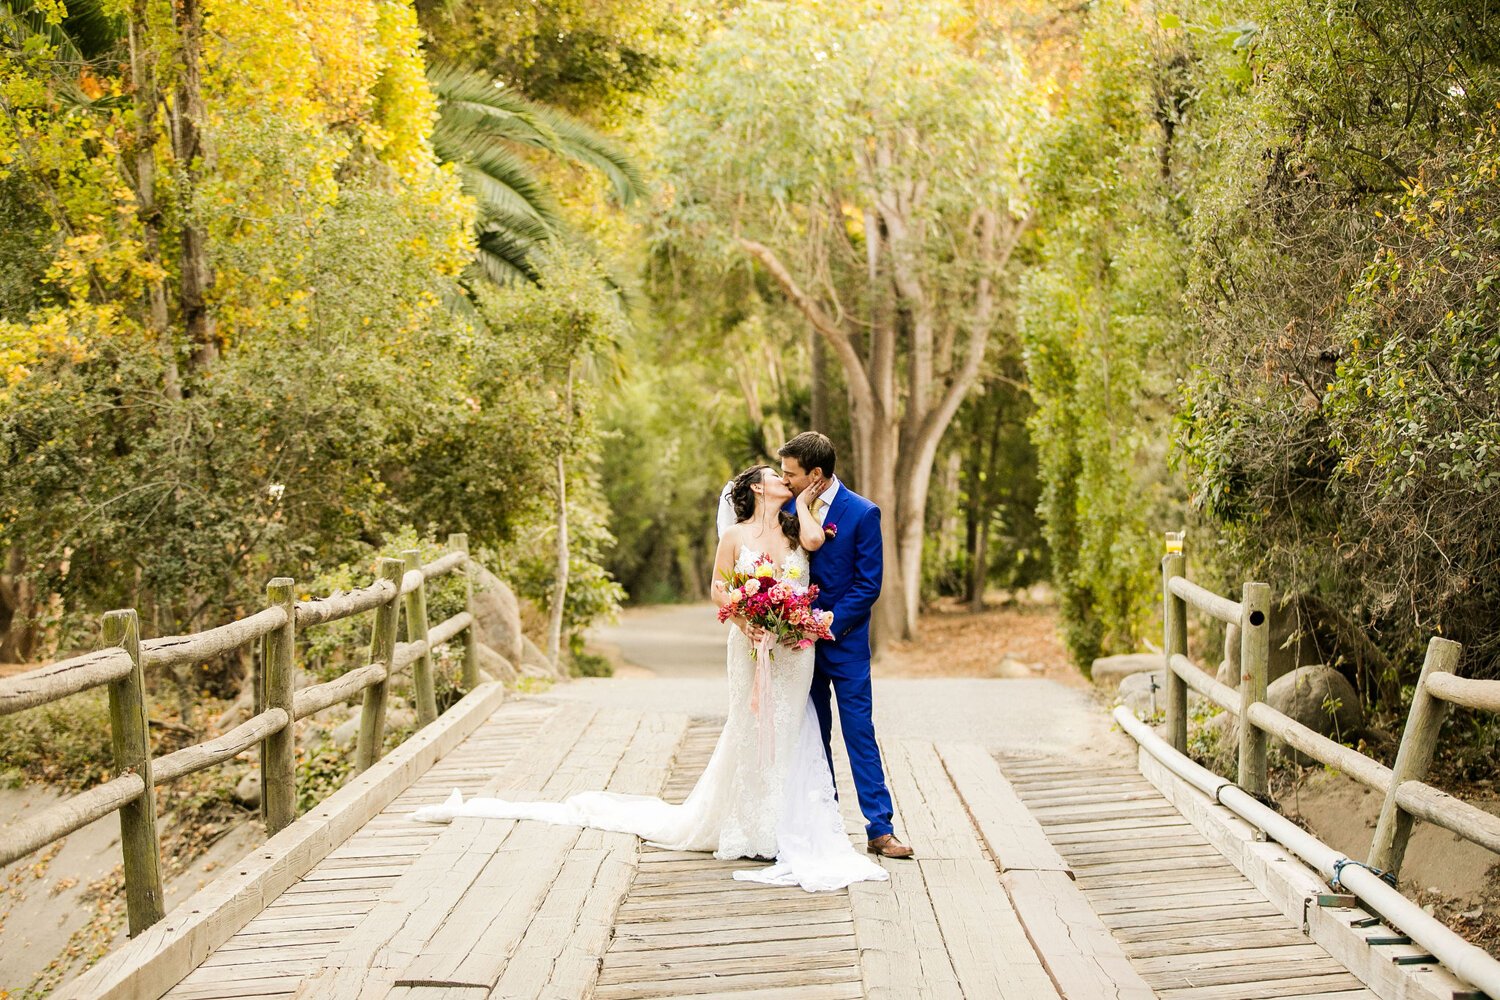 www.santabarbarawedding.com | Nightingale Photography | Rancho Dos Pueblos | Wild Hearts Events | Knot Just Flowers | TEAM Hair &amp; Makeup | Bride and Groom Kiss Among the Trees